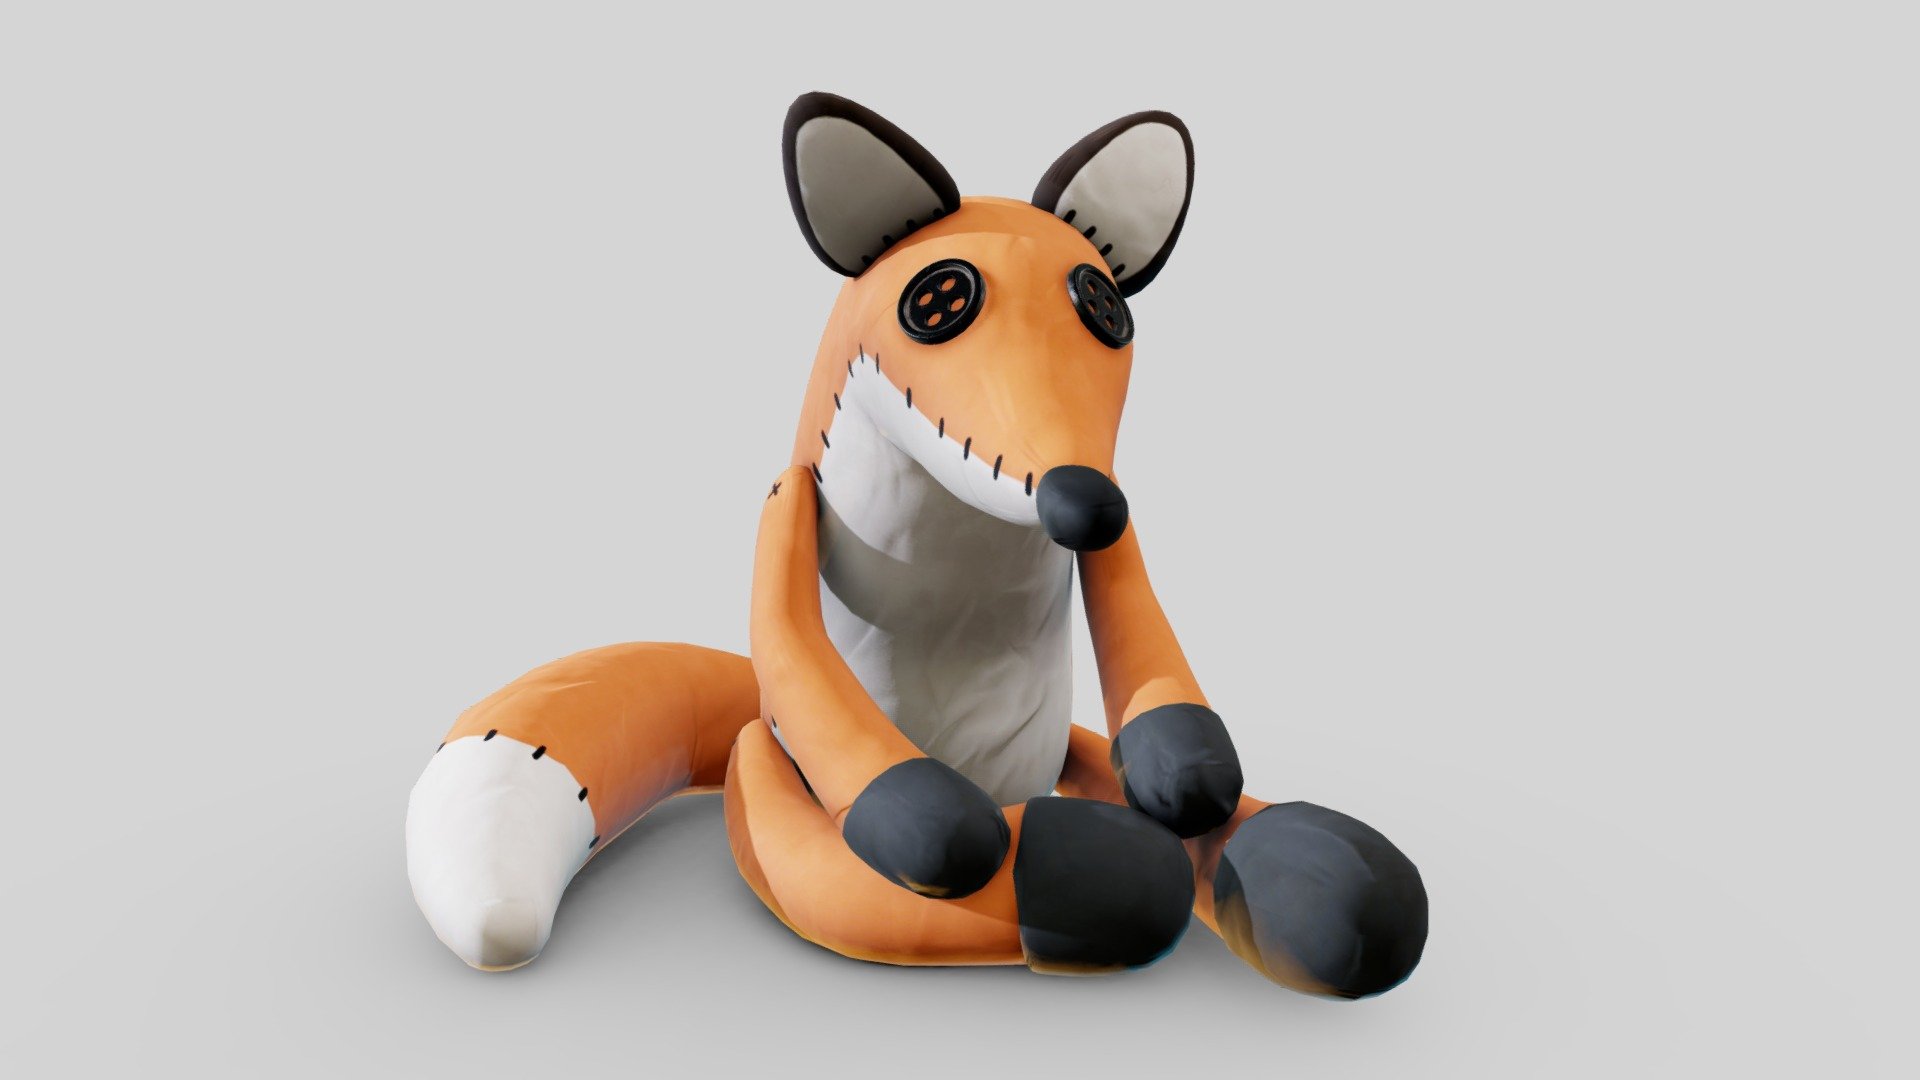 Fox Plush Toy for your renders and games

Textures:

Diffuse color, Roughness,Metallic, Normal, AO

All textures are 2K

Files Formats:

Blend

Fbx

Obj - Fox Plush Toy - Buy Royalty Free 3D model by Vanessa Araújo (@vanessa3d) 3d model